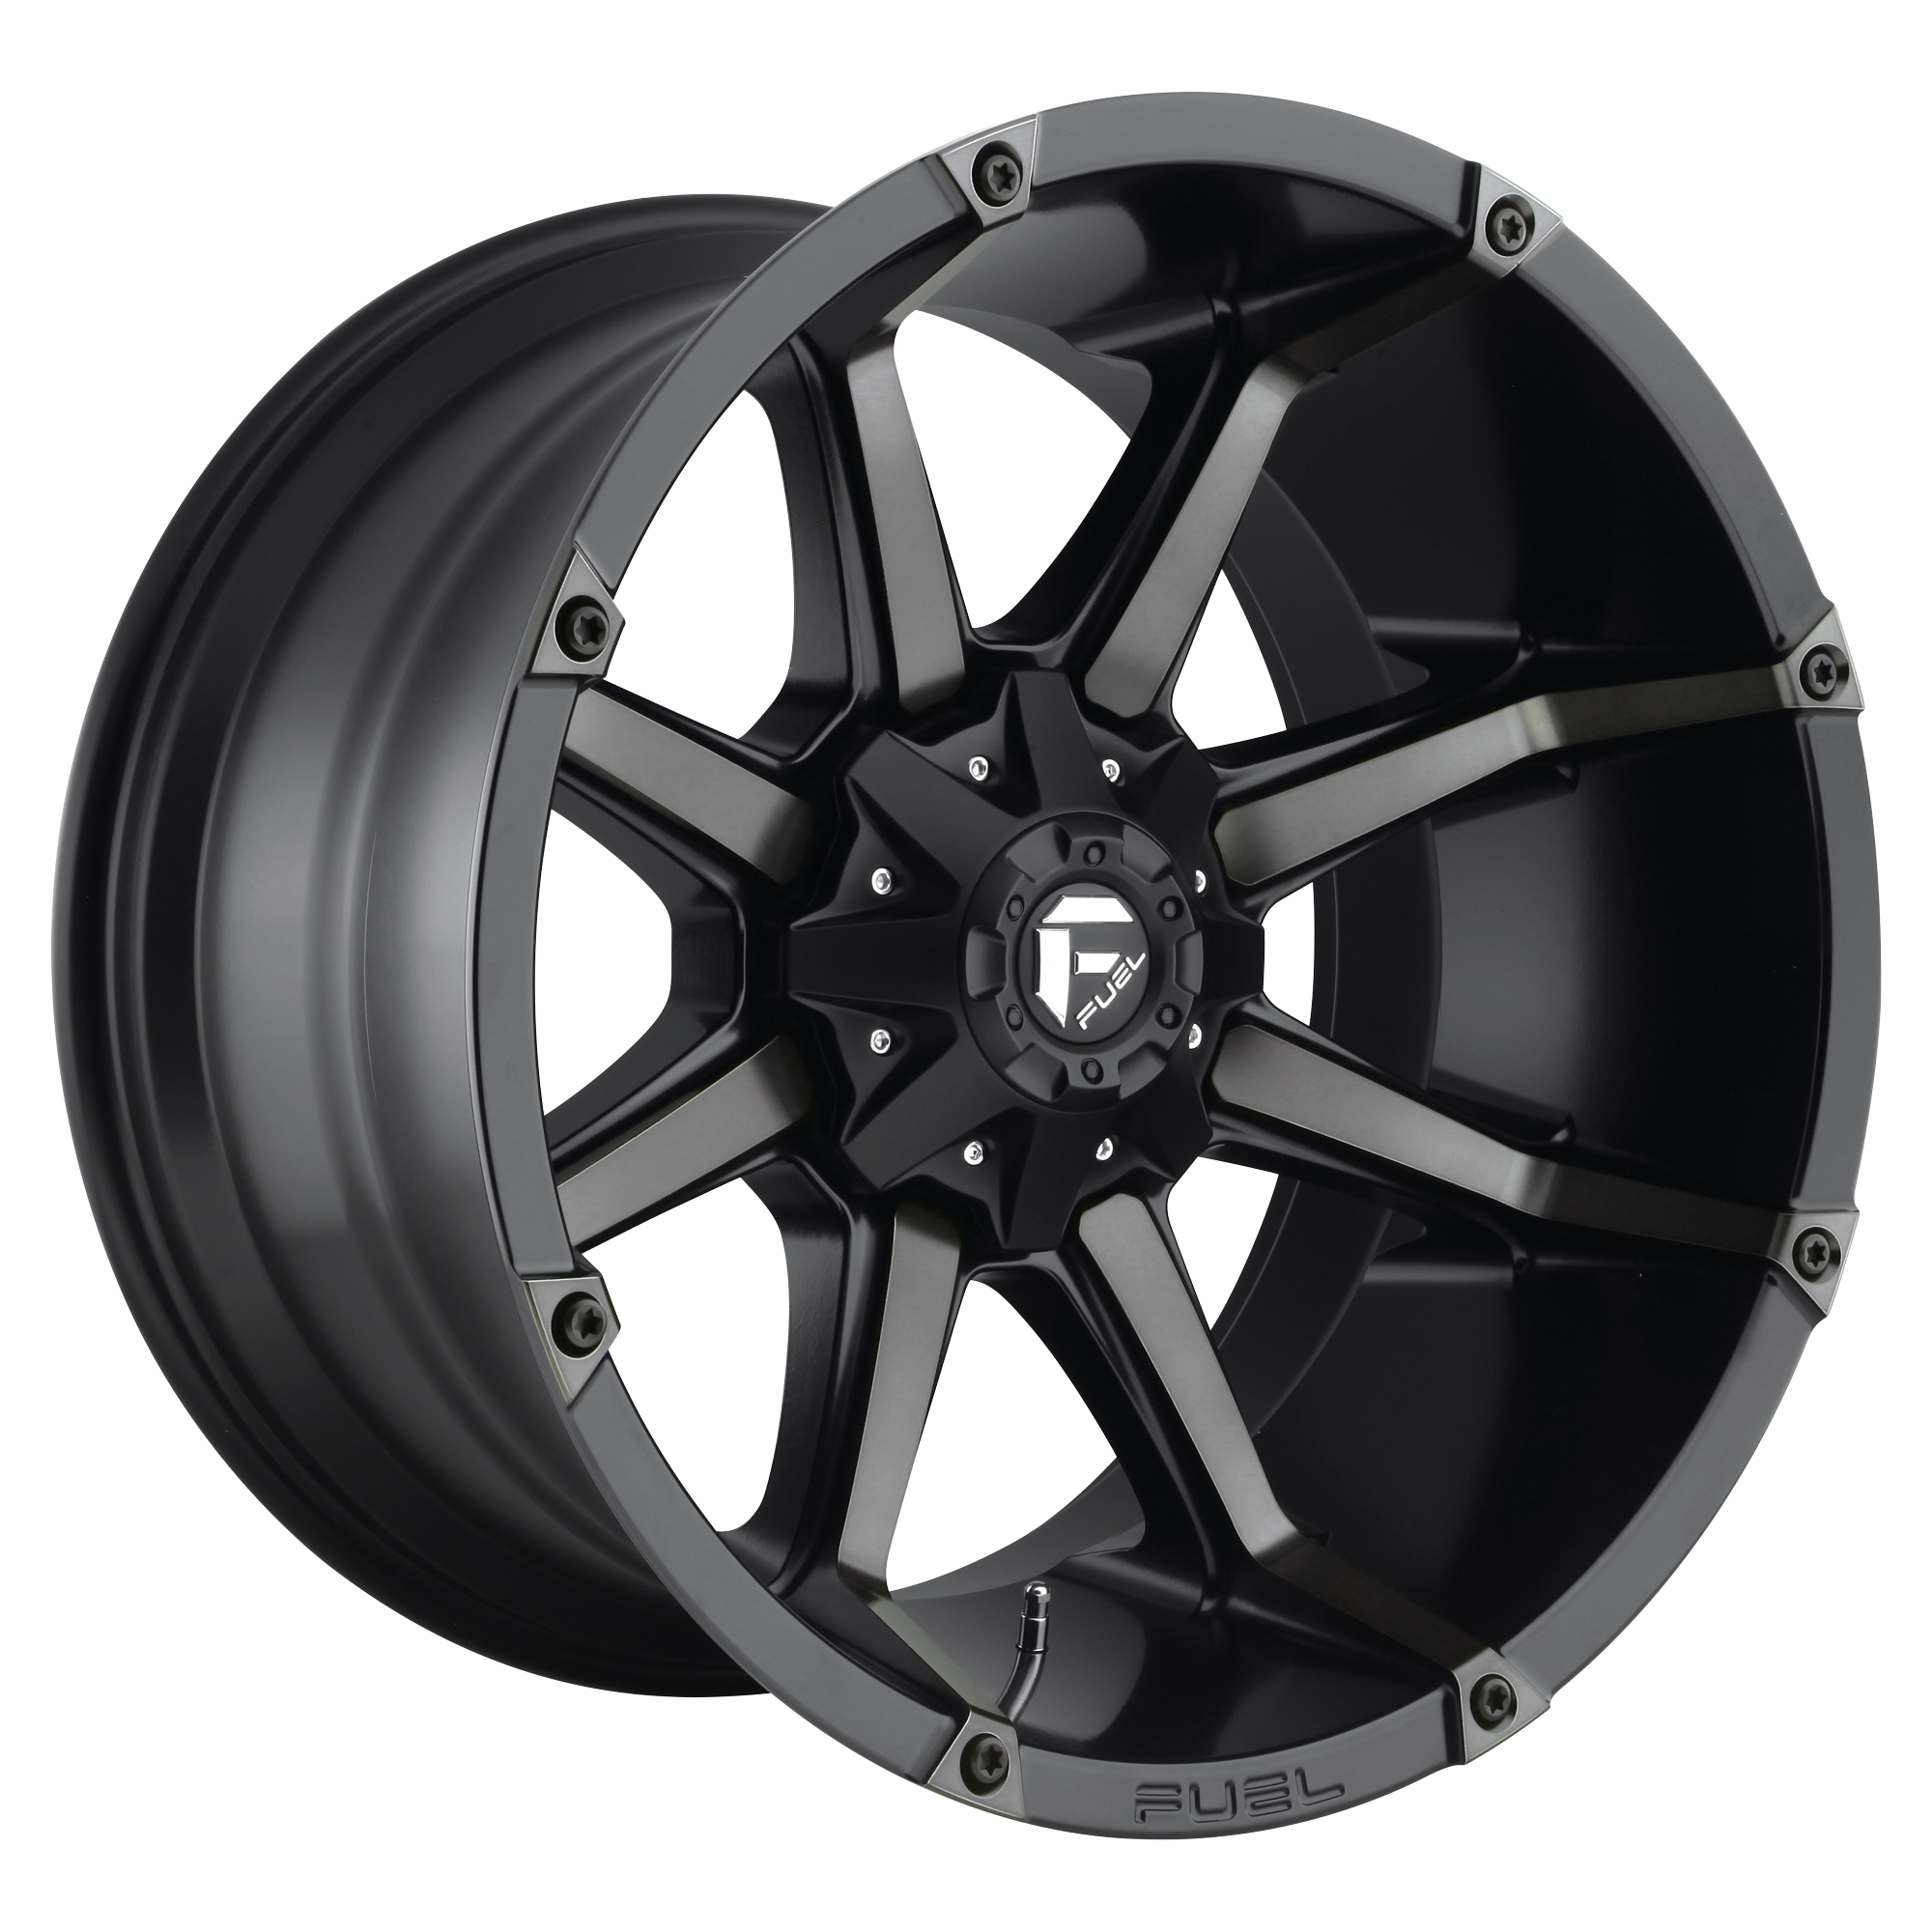 COUPLER 17x9 5x114.30/5x127.00 MATTE BLACK DOUBLE DARK TINT (-12 mm) - Tires and Engine Performance